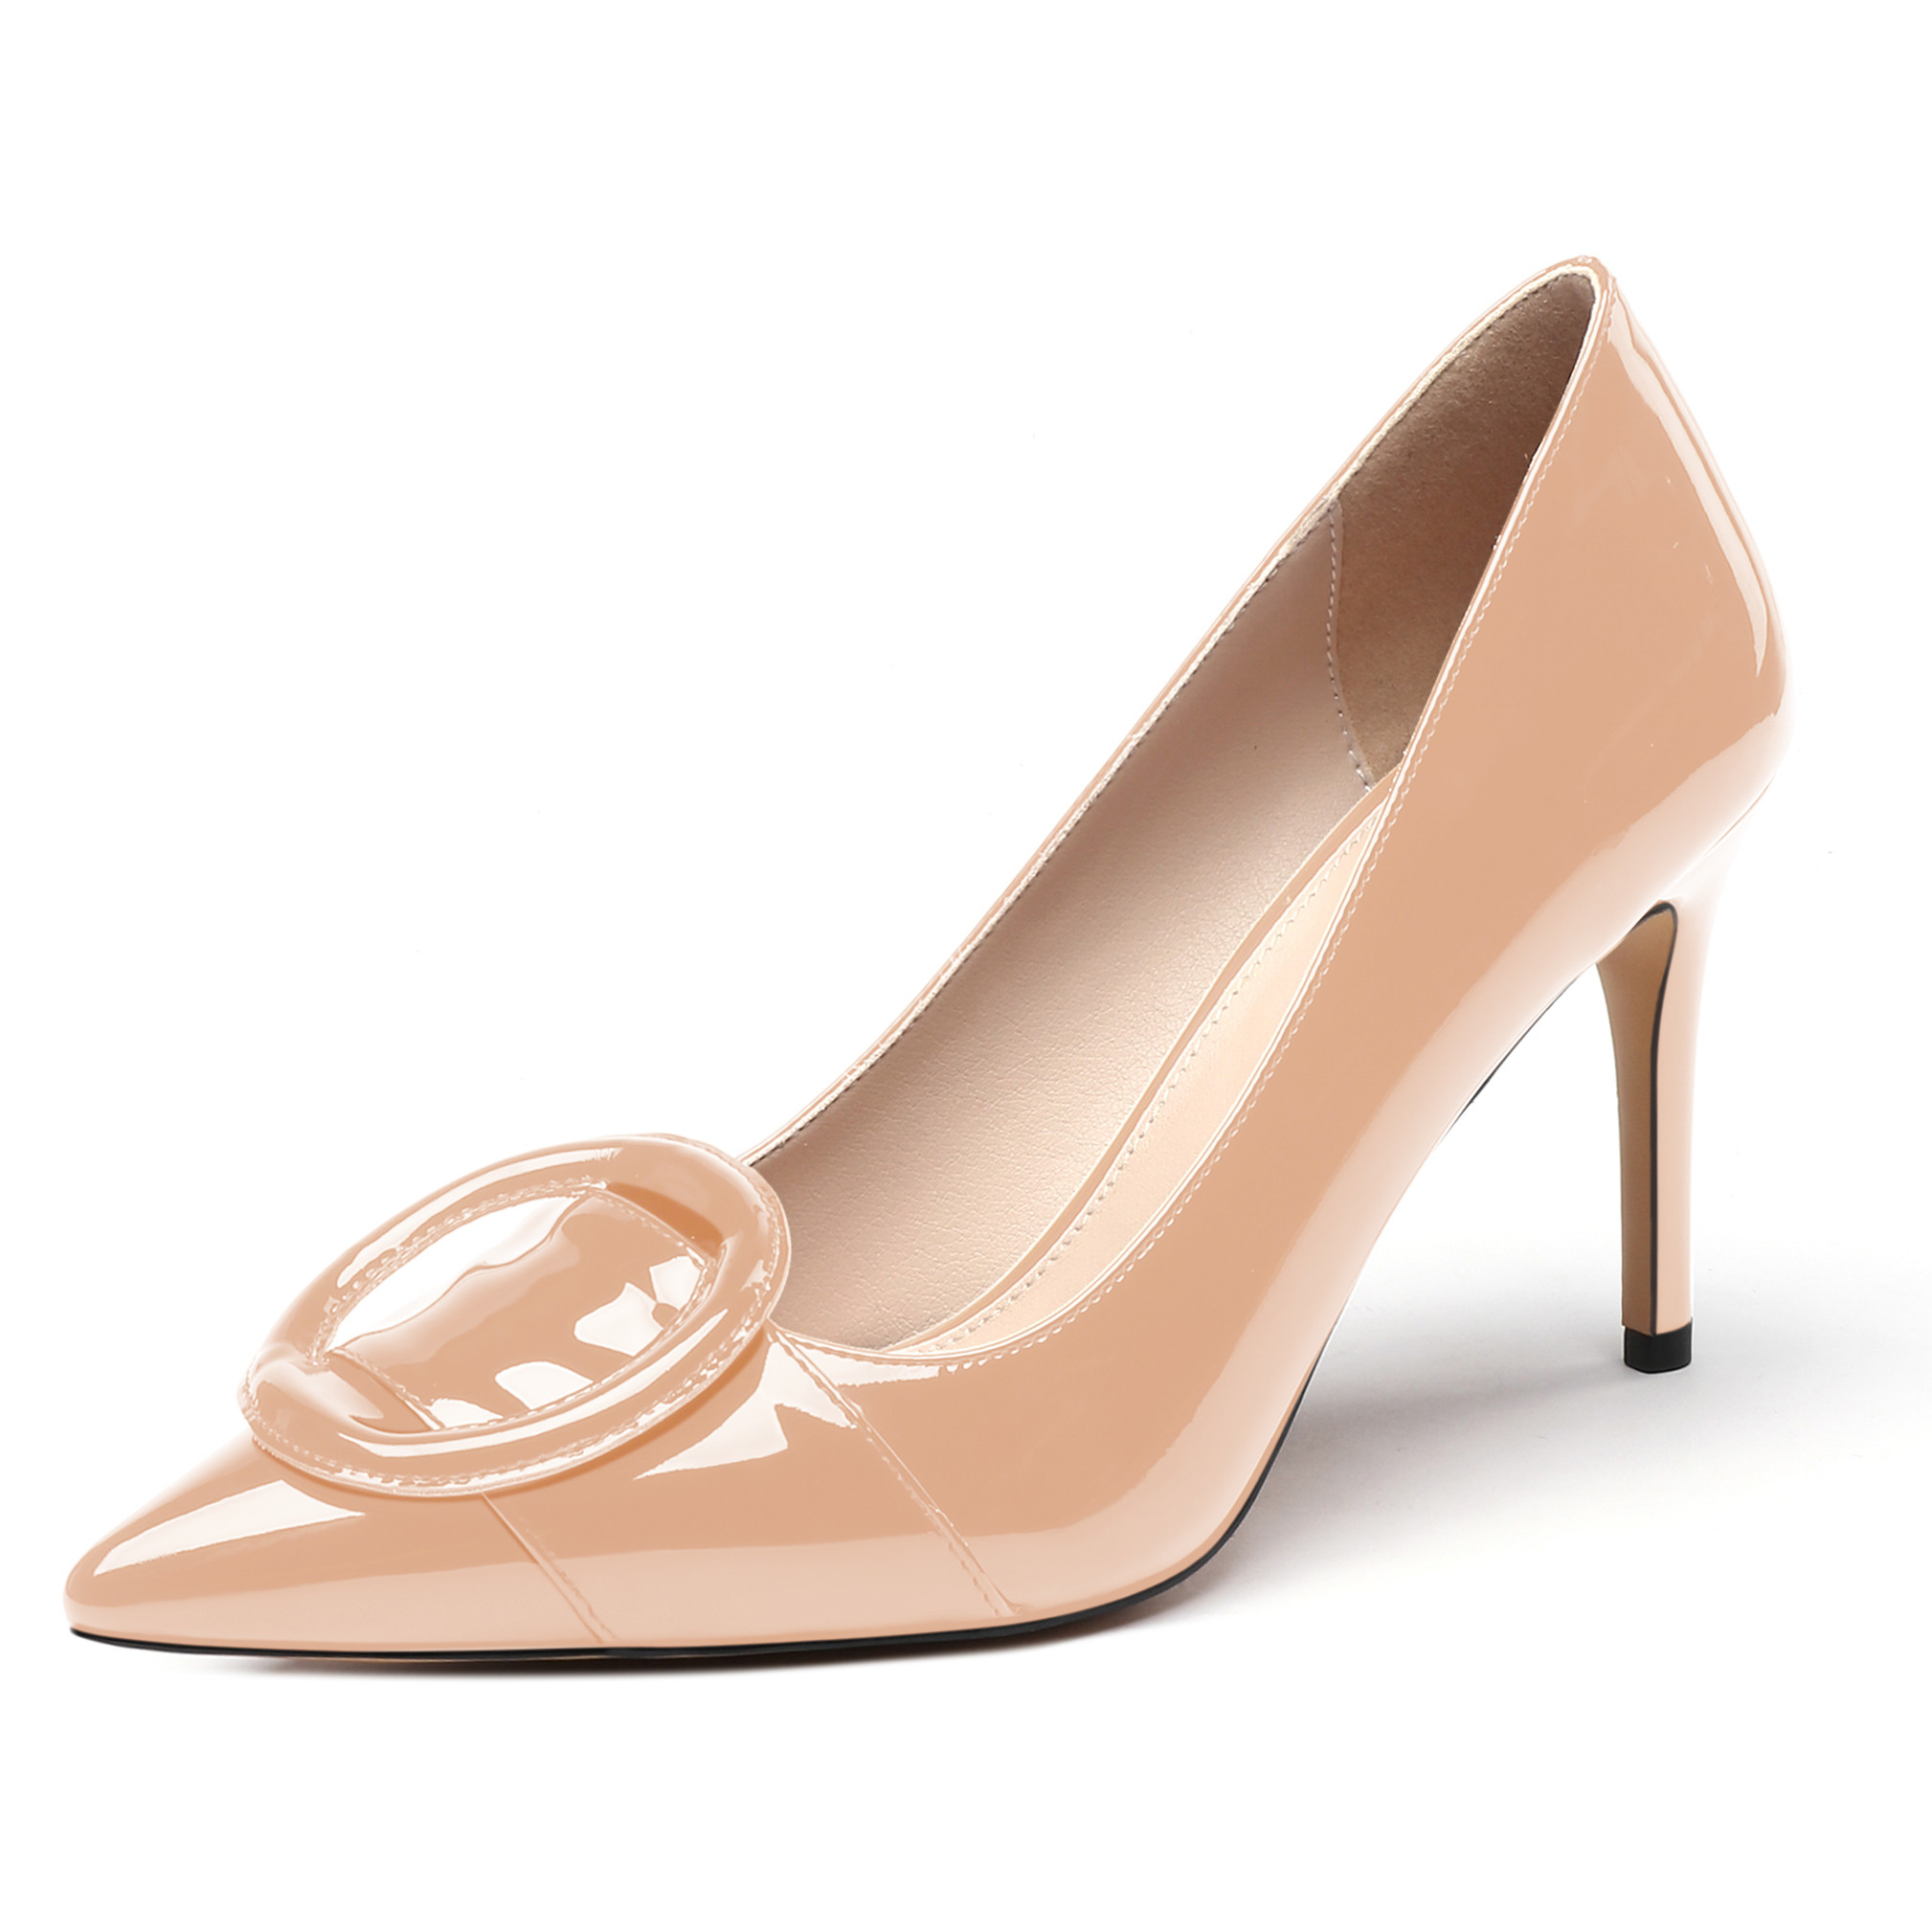 Hailey Slip On Patent Pointed Toe Pumps